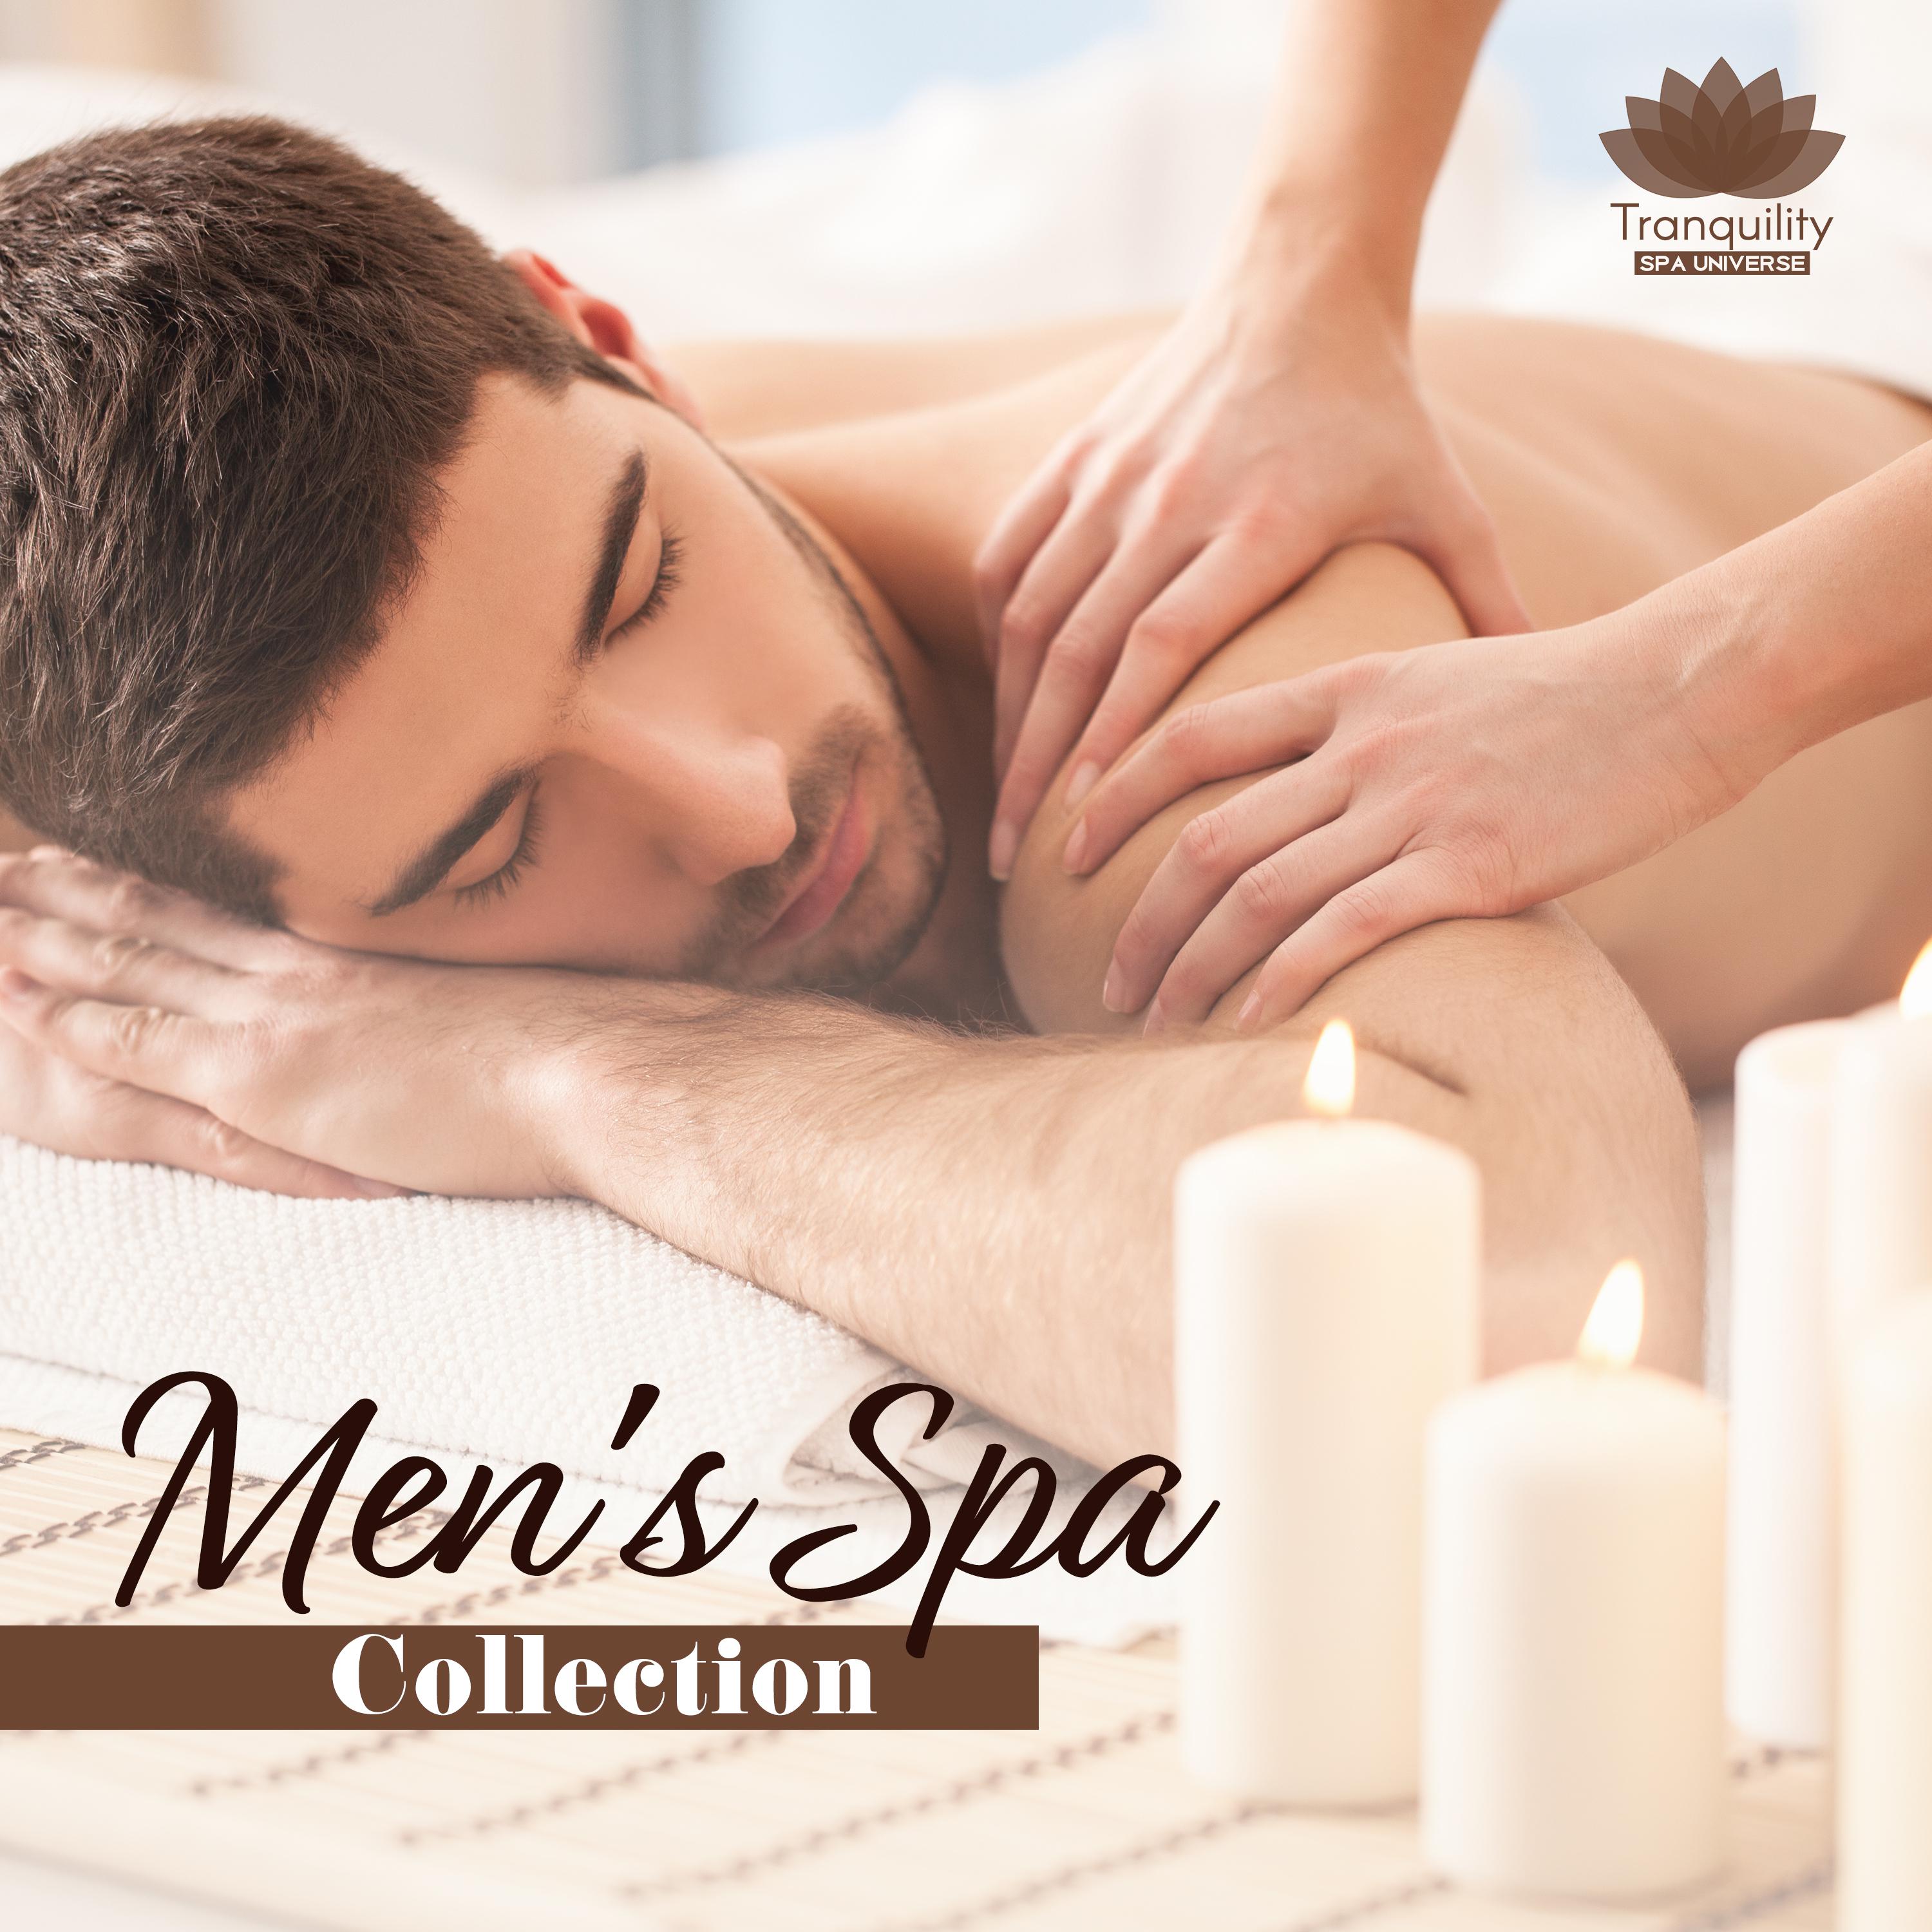 Men's Spa Collection (Health, Massage, Relax)